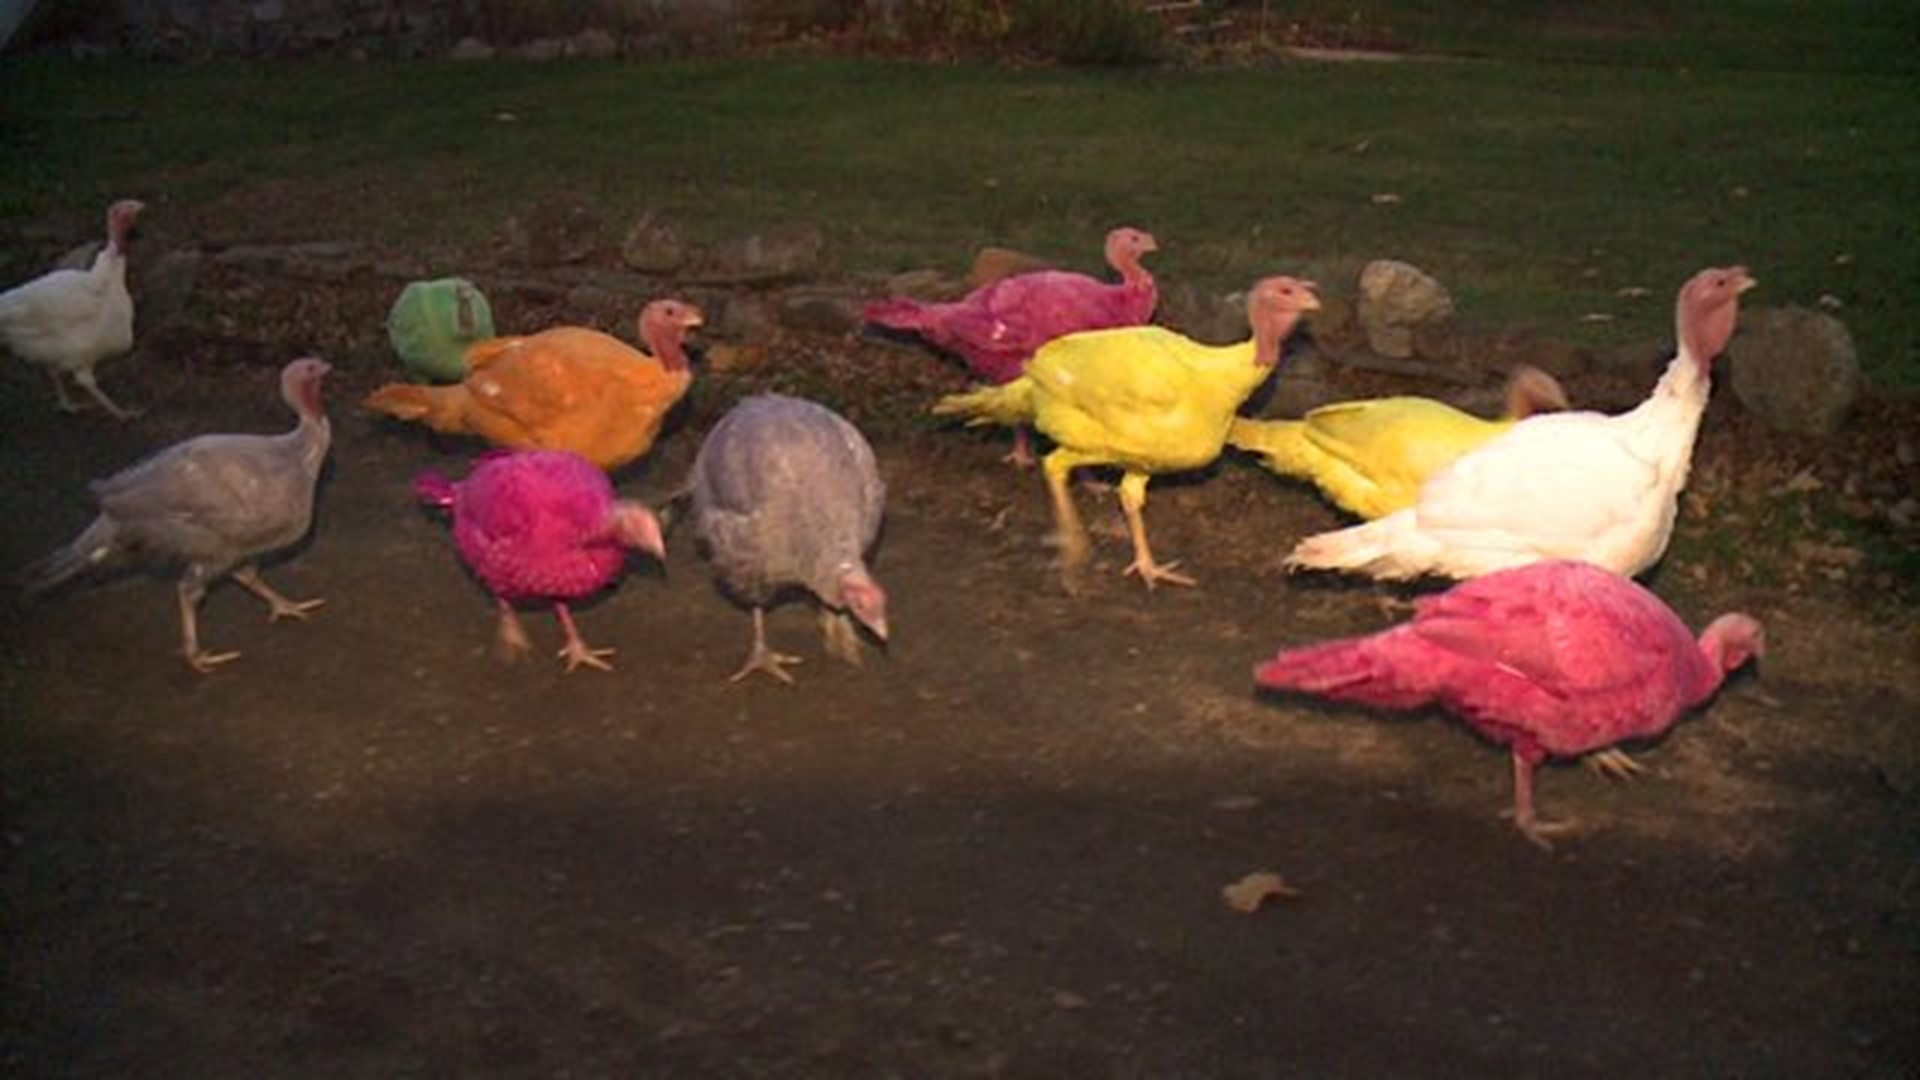 Colored turkeys for this Thanksgiving? You better believe it!